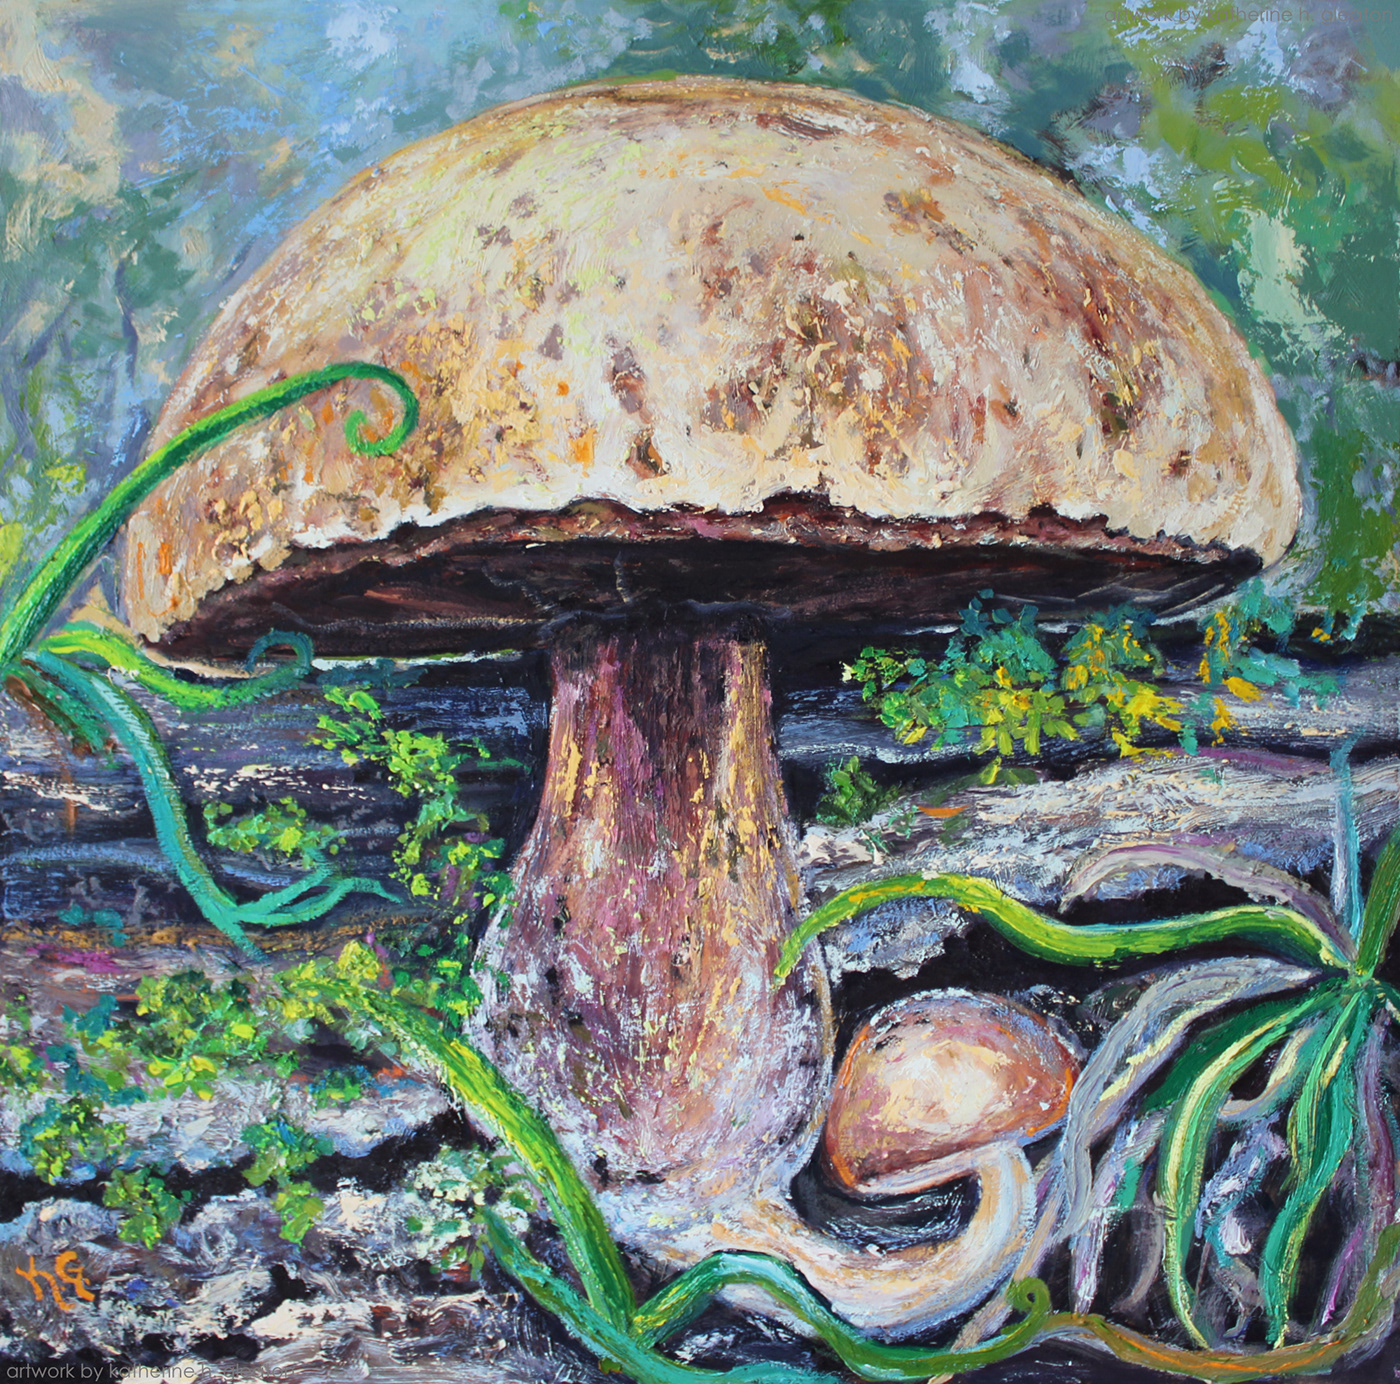 This is an original oil painting of a mushroom found in the Blue Ridge Mountains.